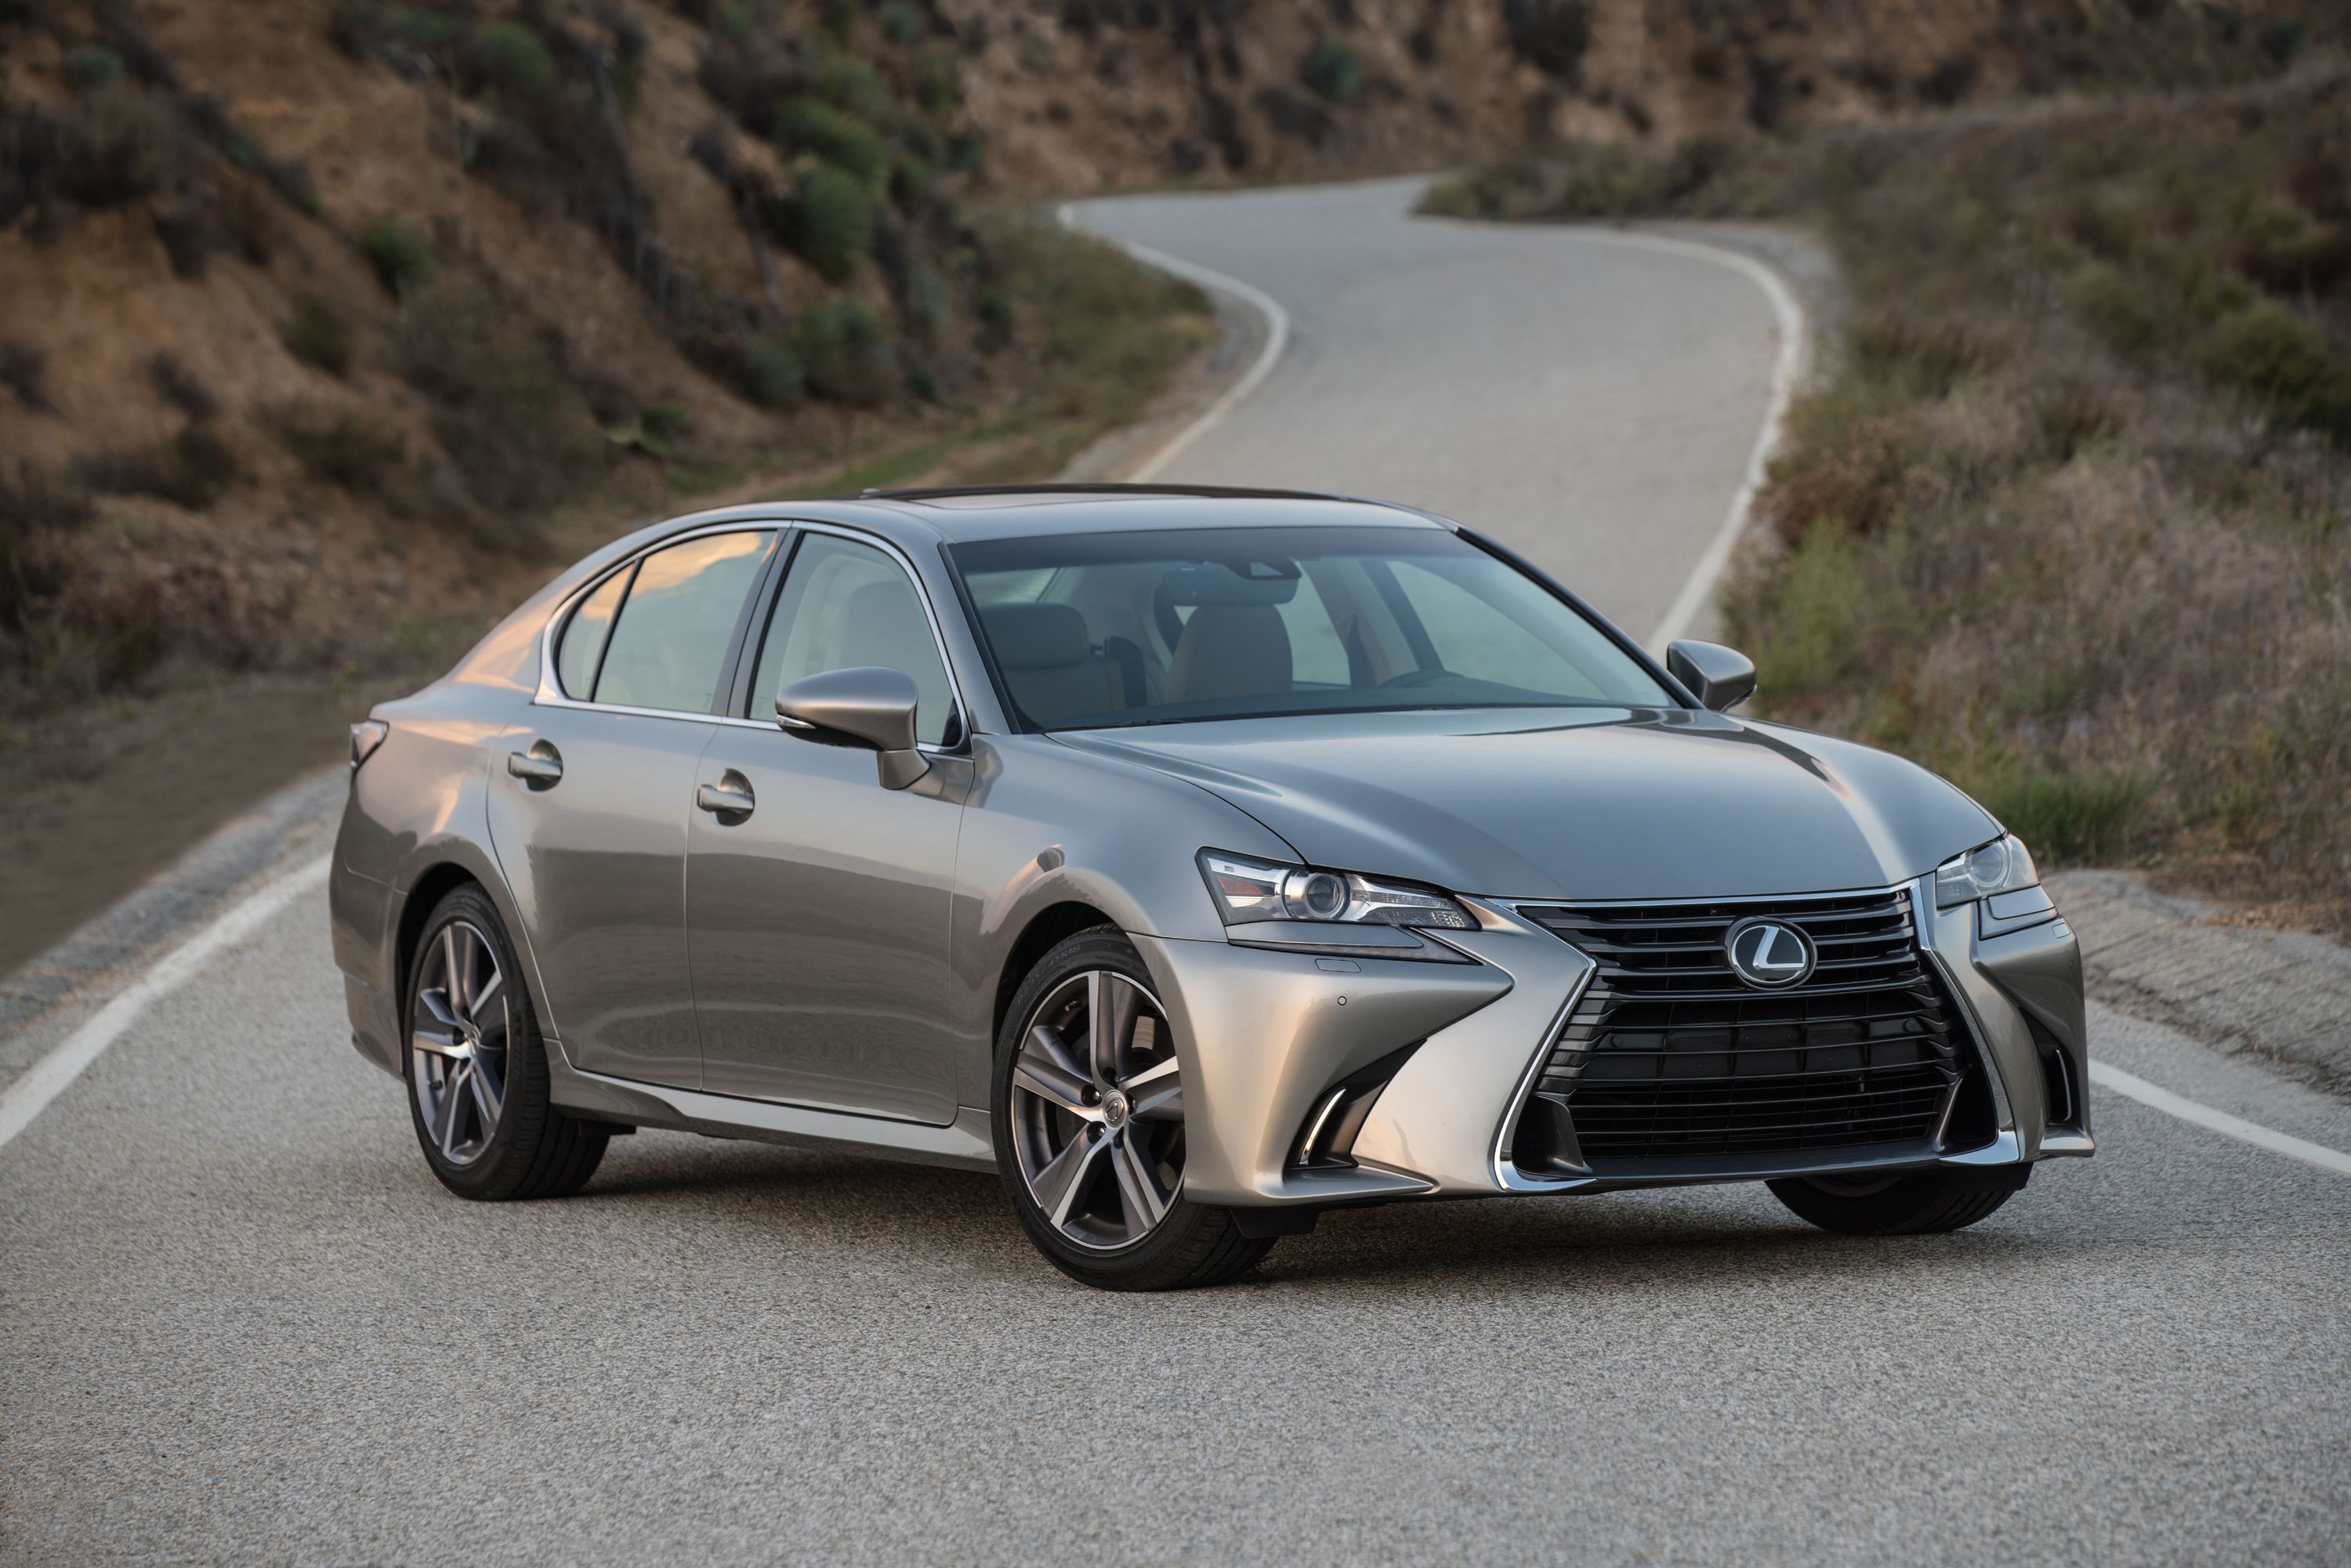 18 Lexus Gs Gs 450h F Sport Rwd Features And Specs